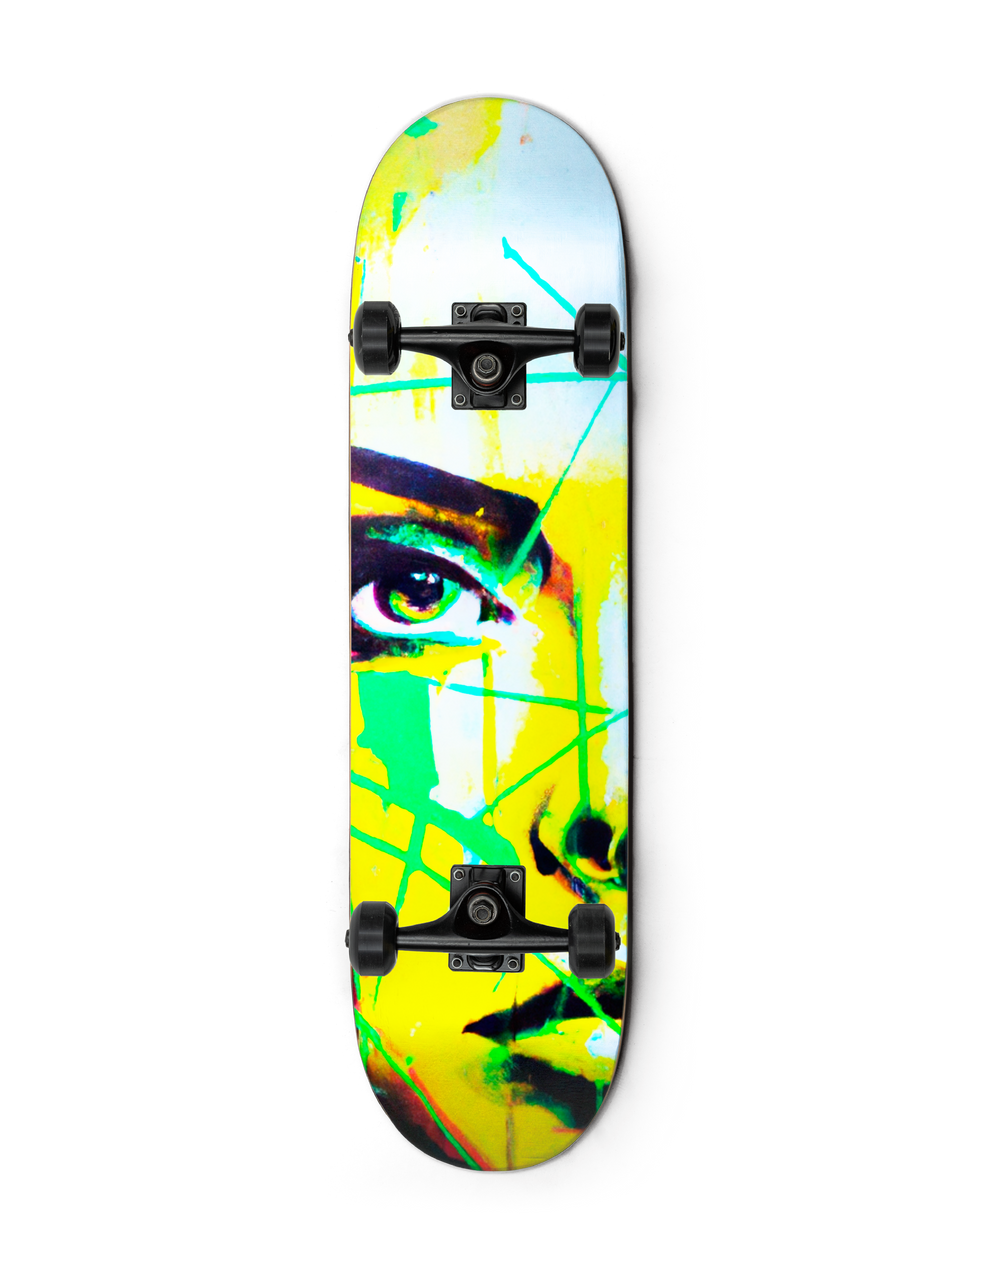 A collector skateboard painted with vibrant colors and featuring a woman's face